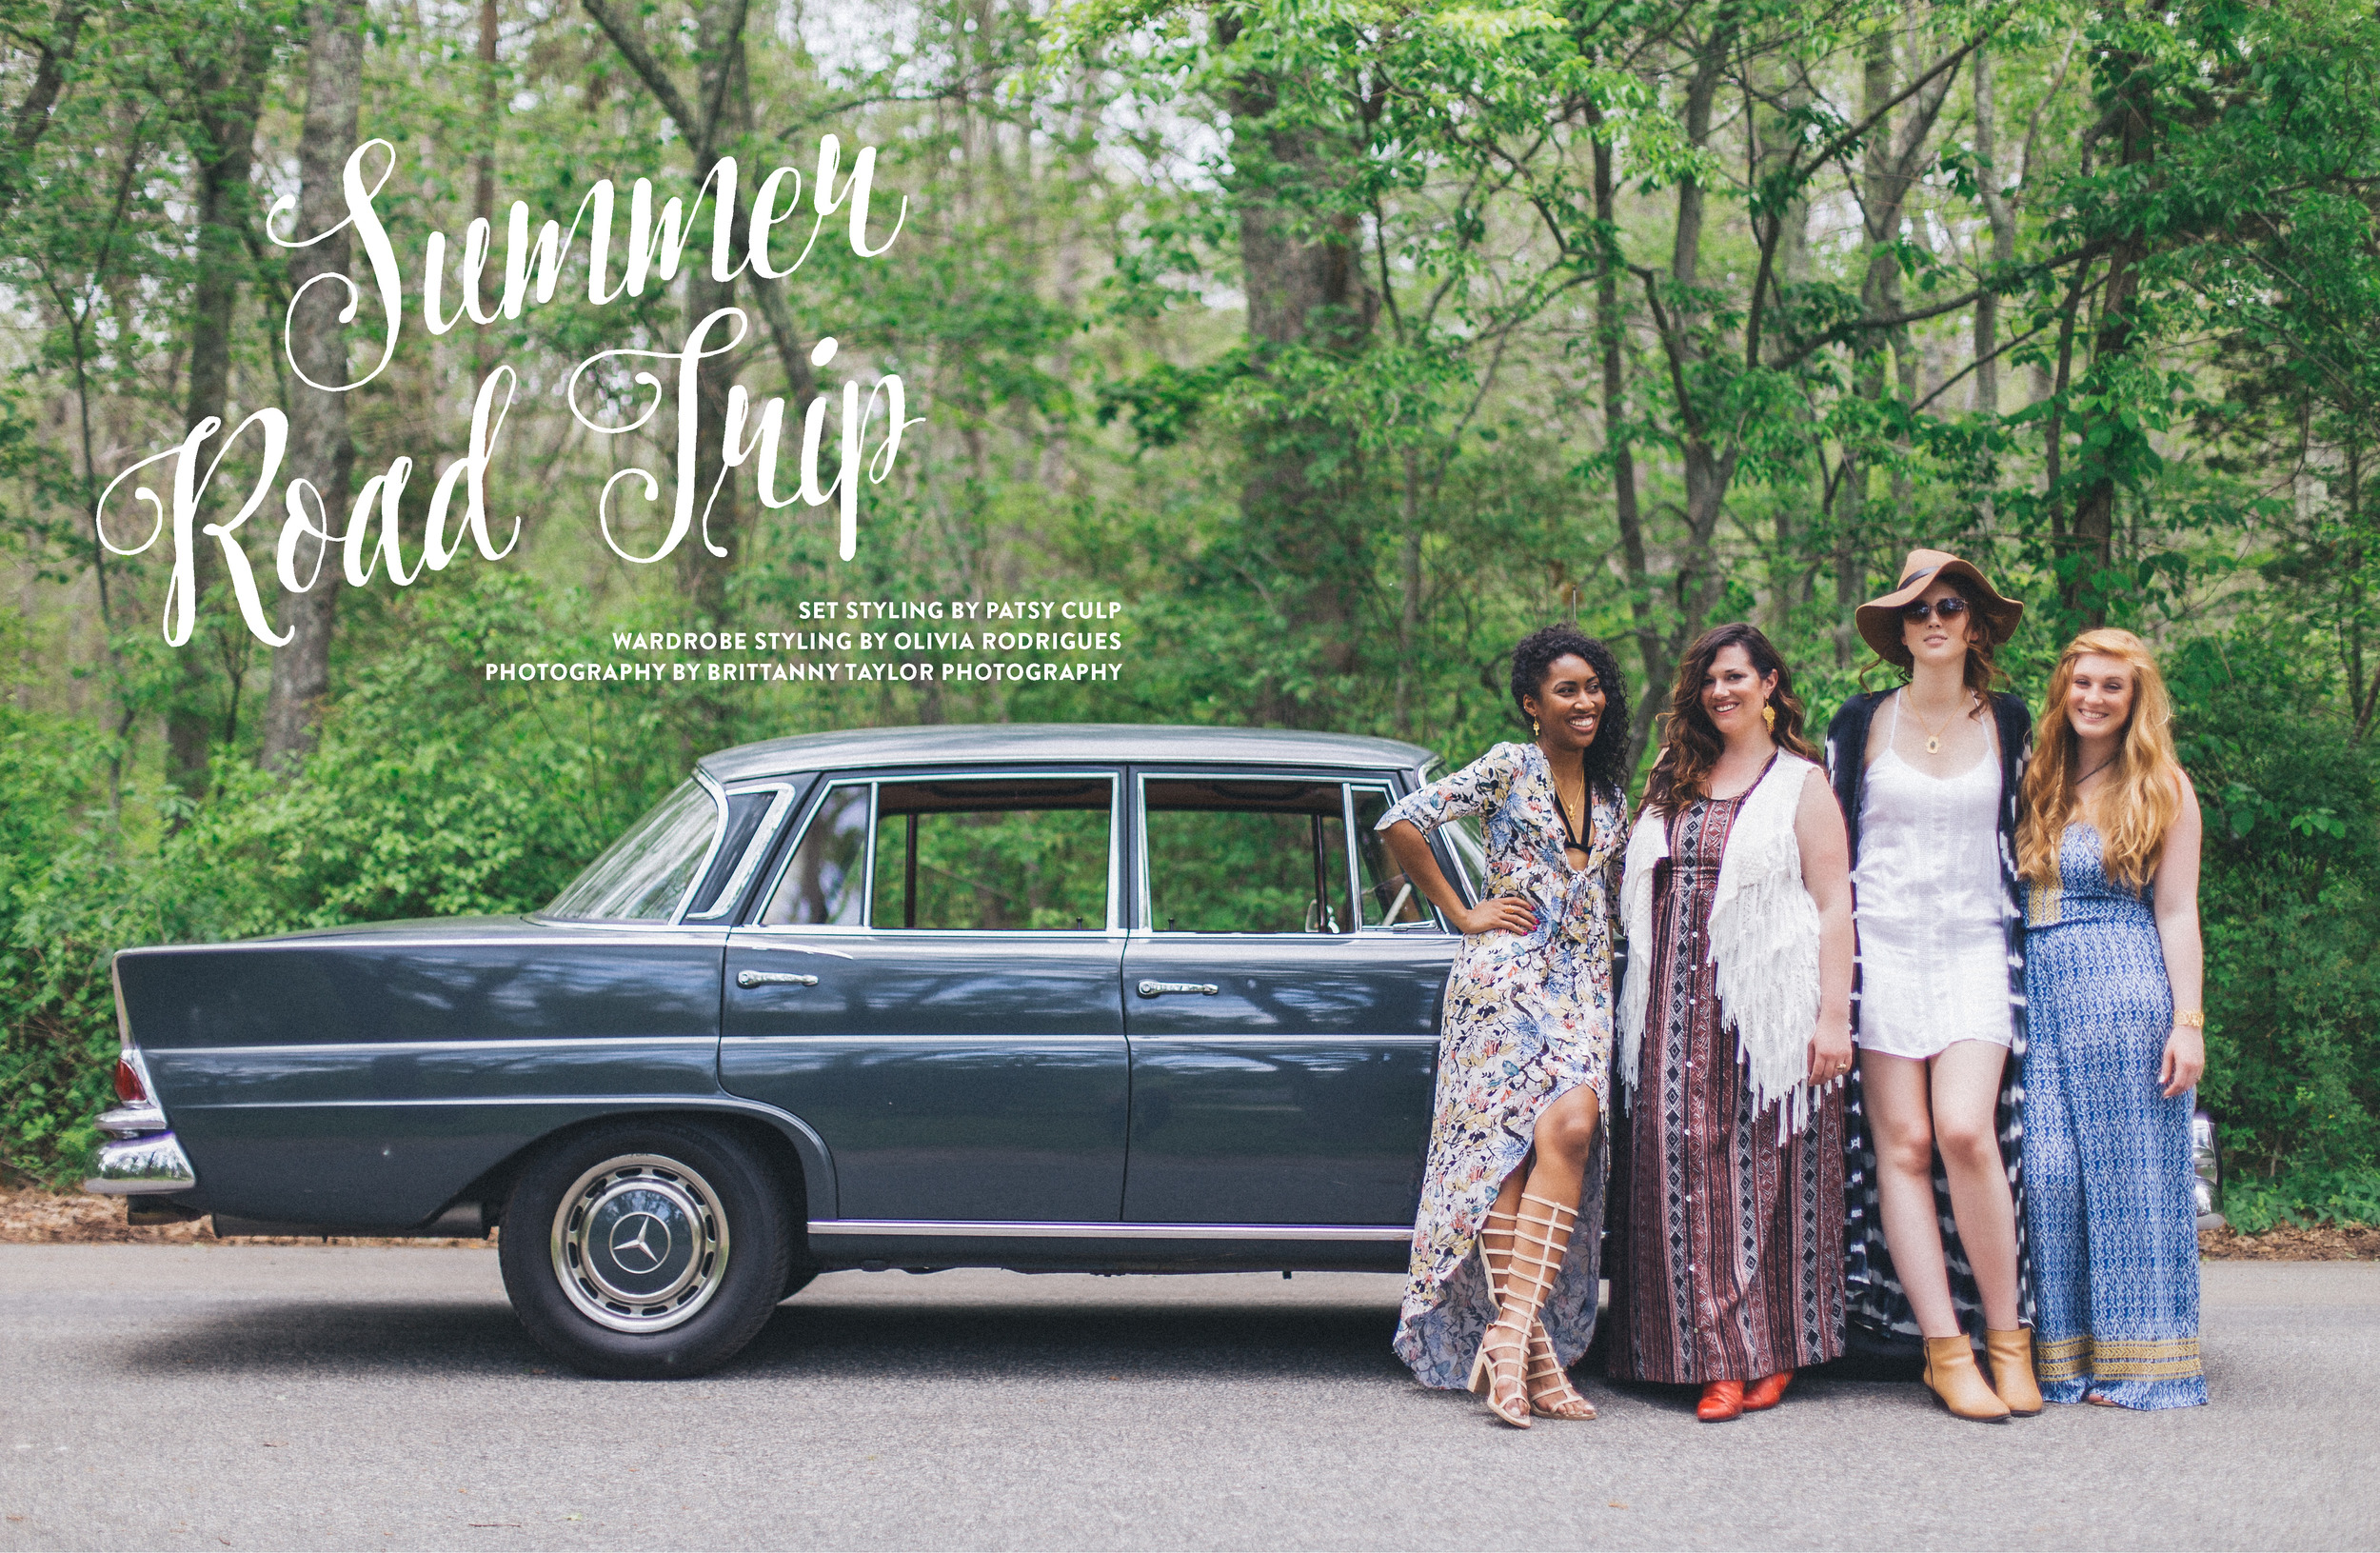 LadyProject-SummerGuide2015-Spreads27.jpg